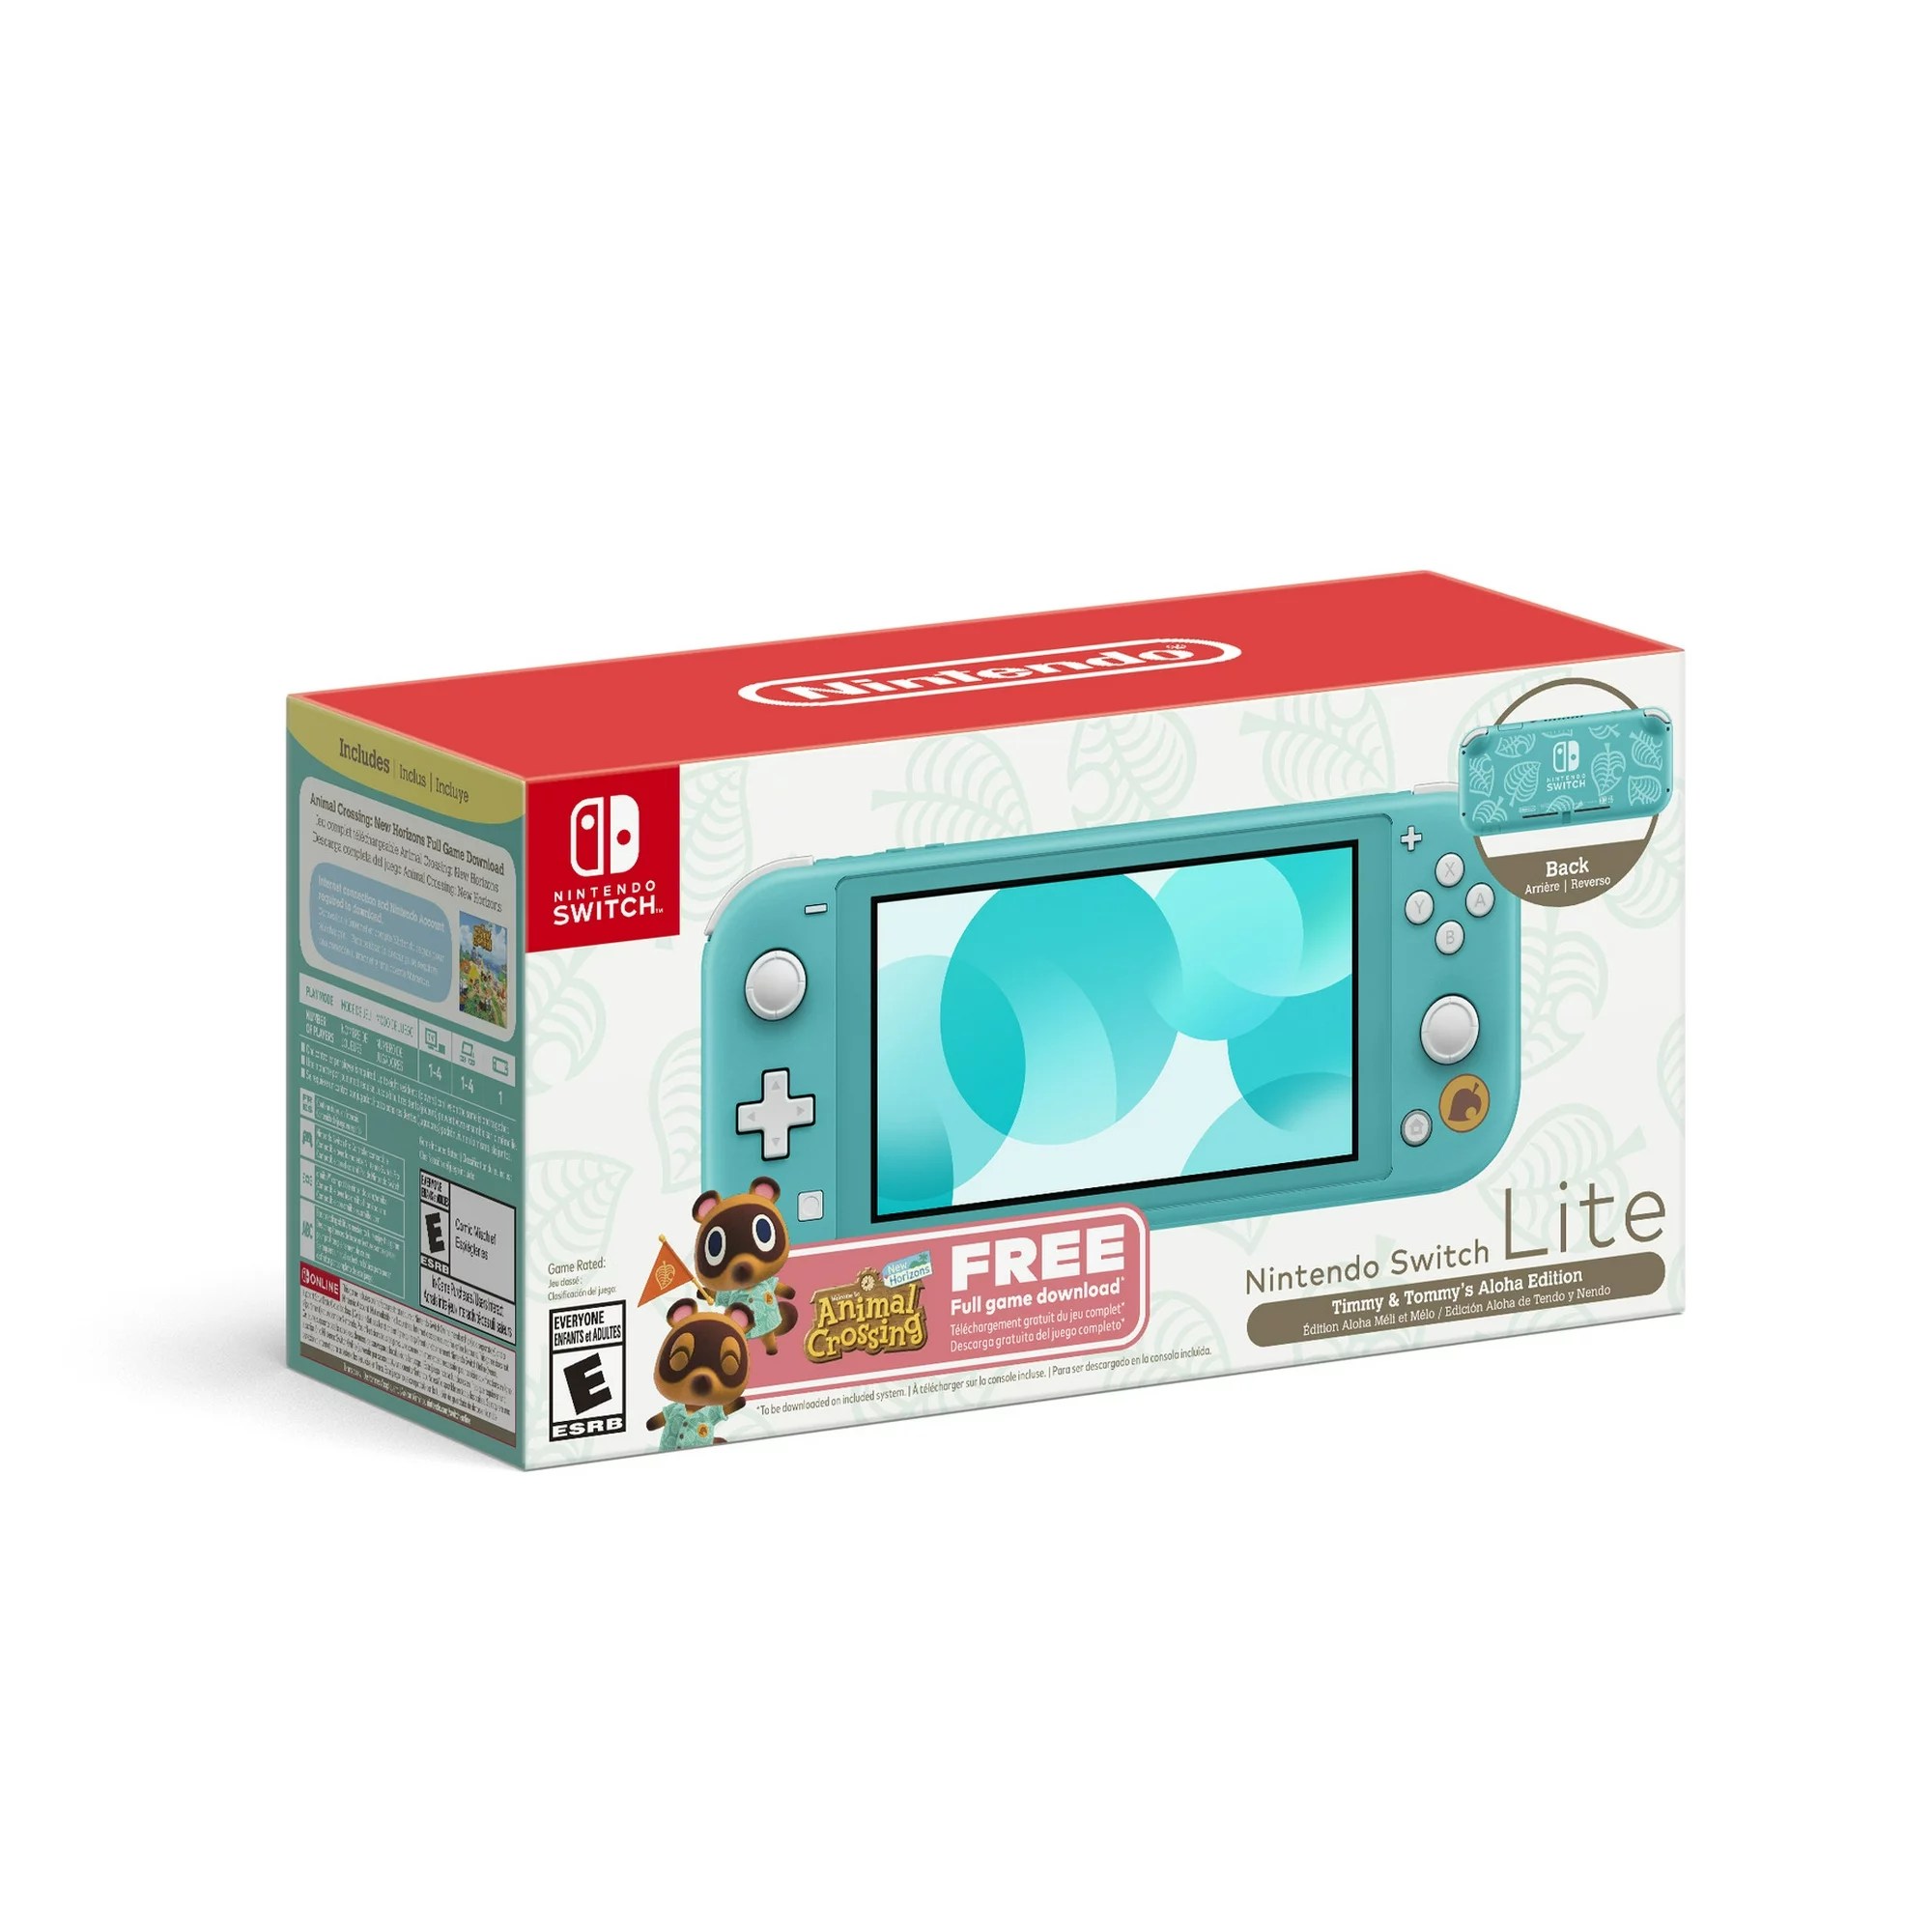 Get Animal Crossing: New Horizons for free with this Nintendo Switch Lite bundle